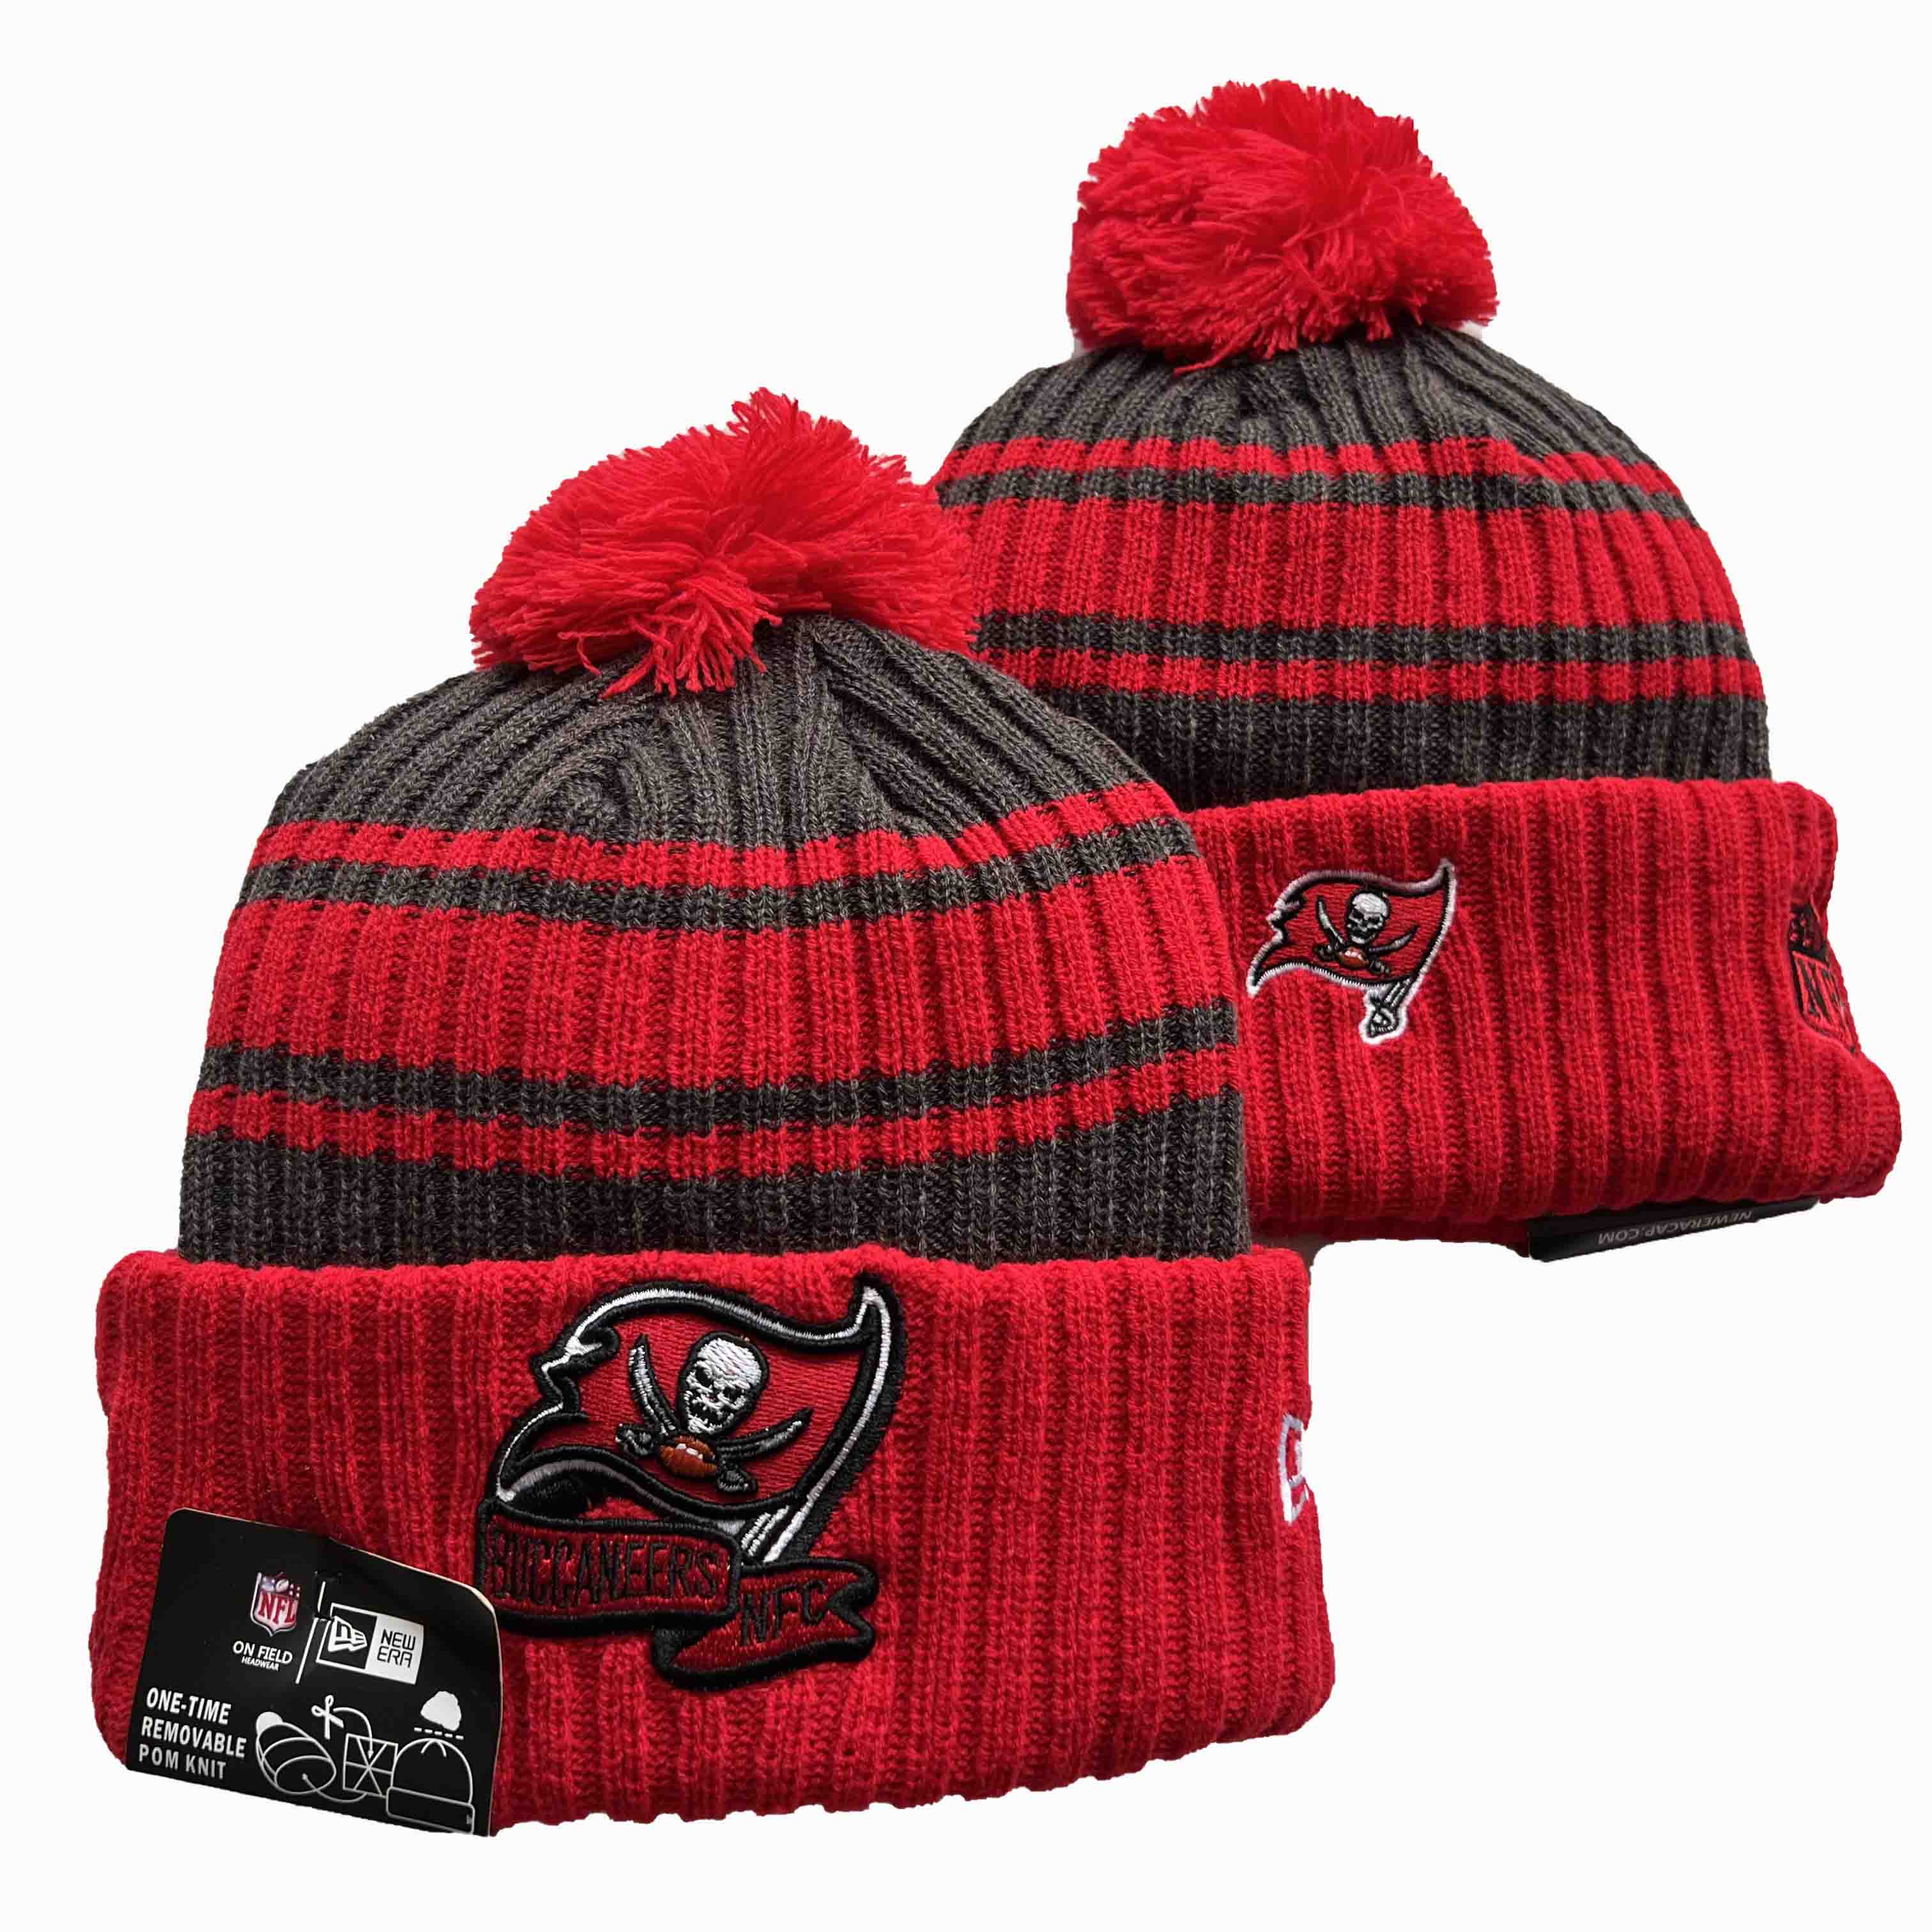 Tampa Bay Buccaneers 2021 Knit Hats 0219